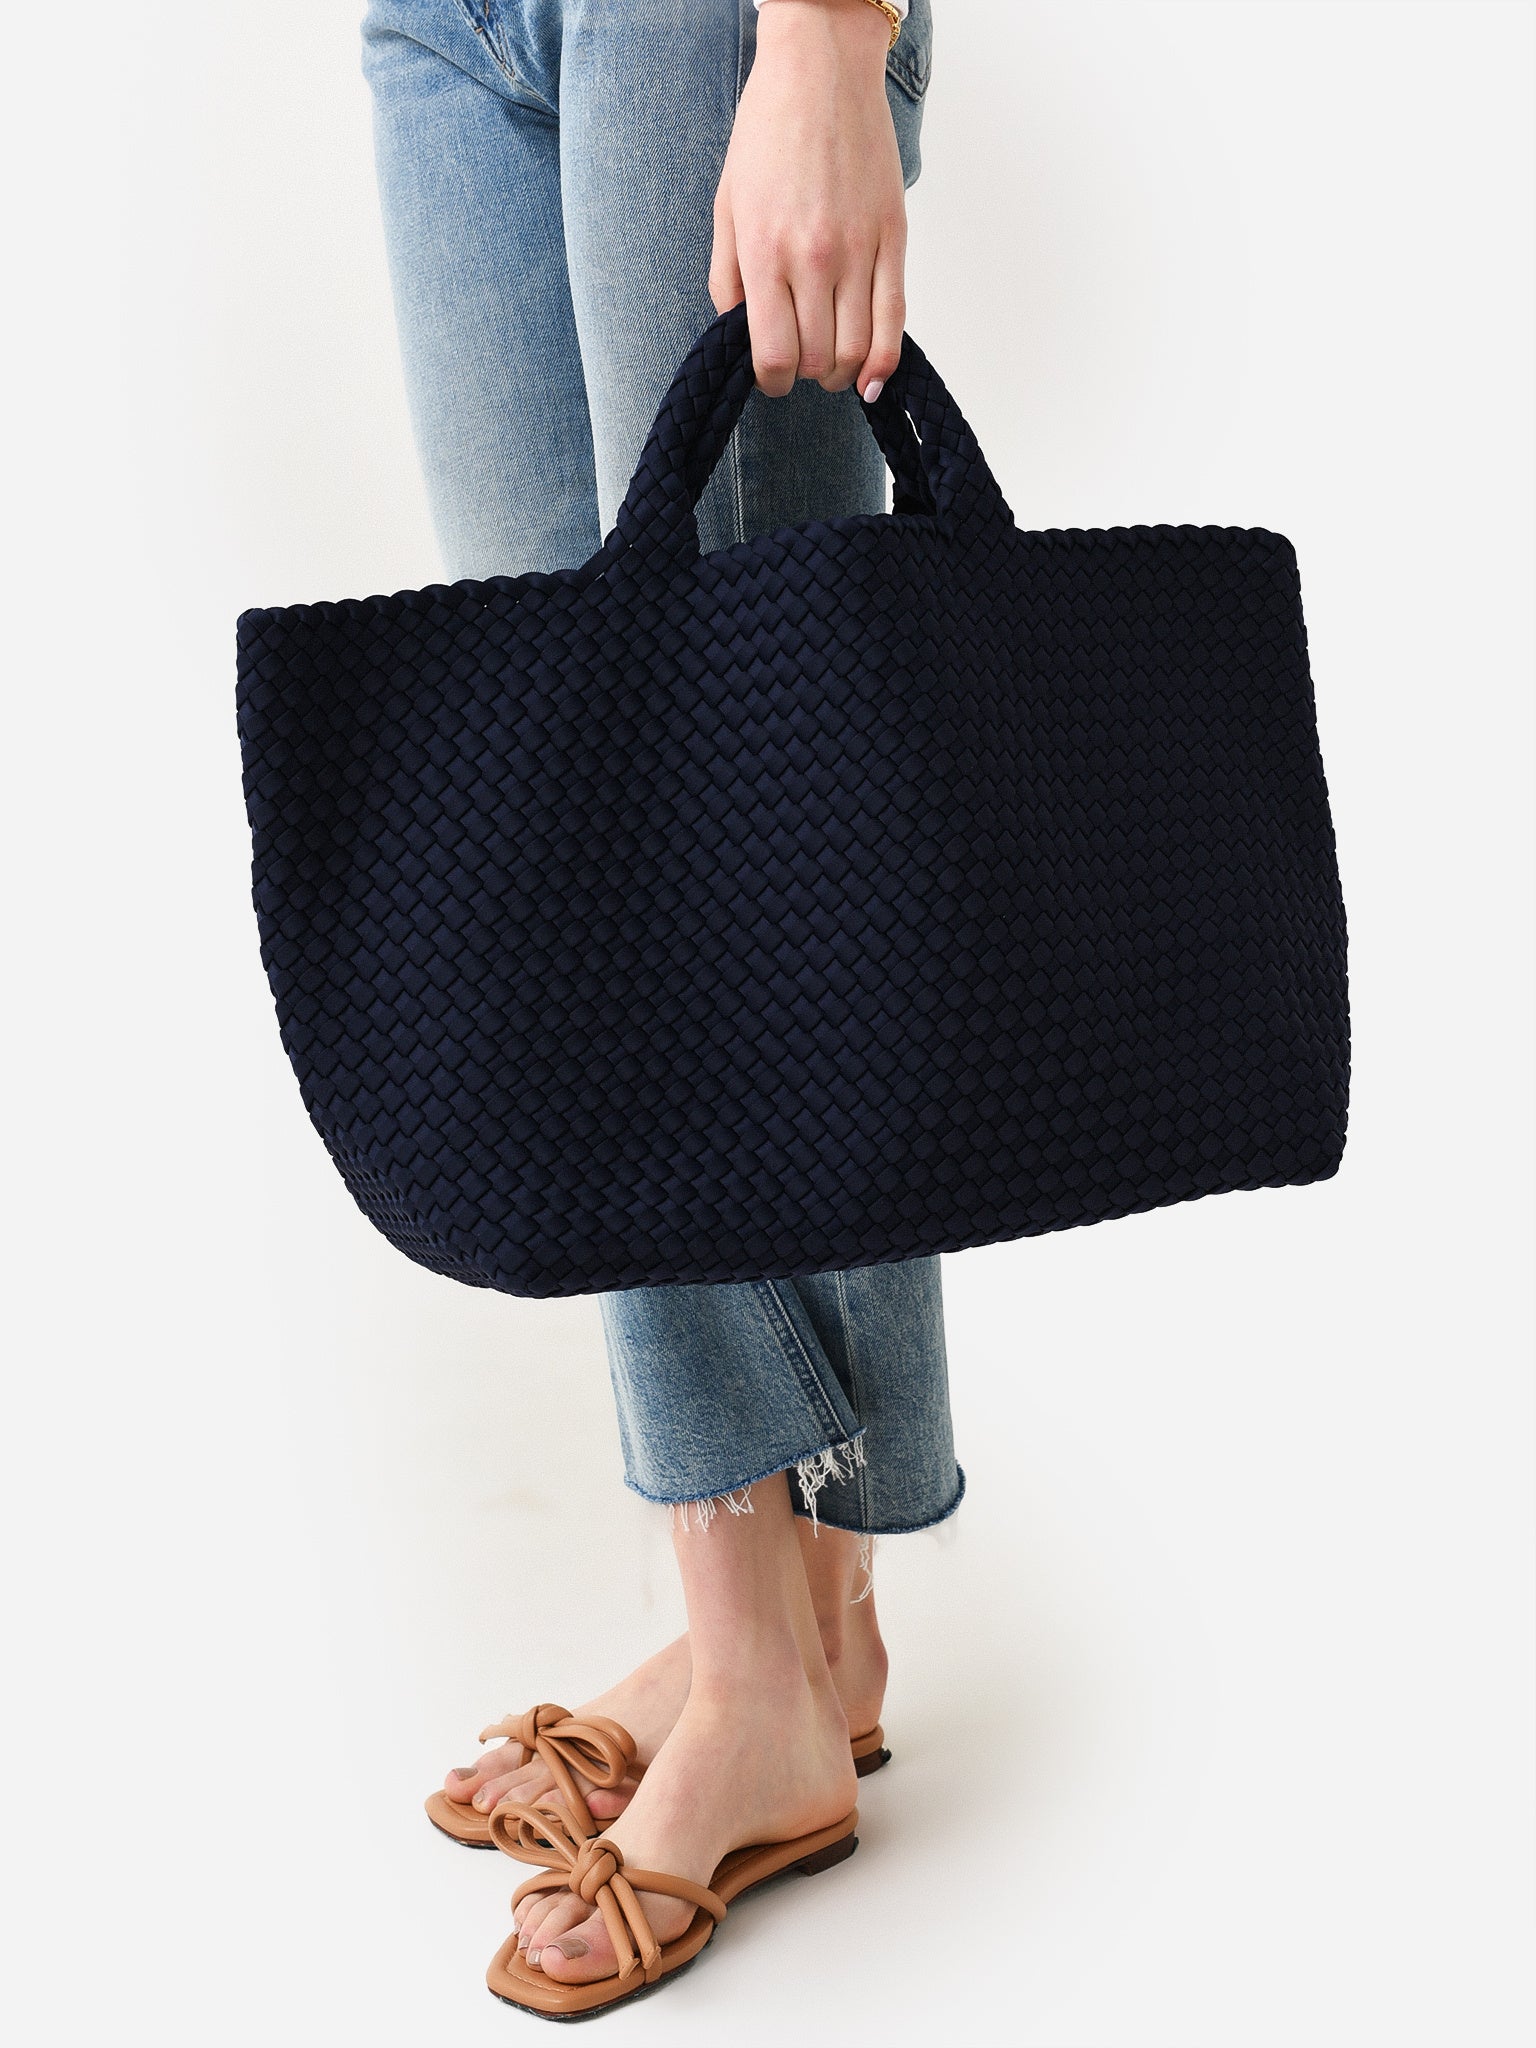 Naghedi Tote Review - the gray details